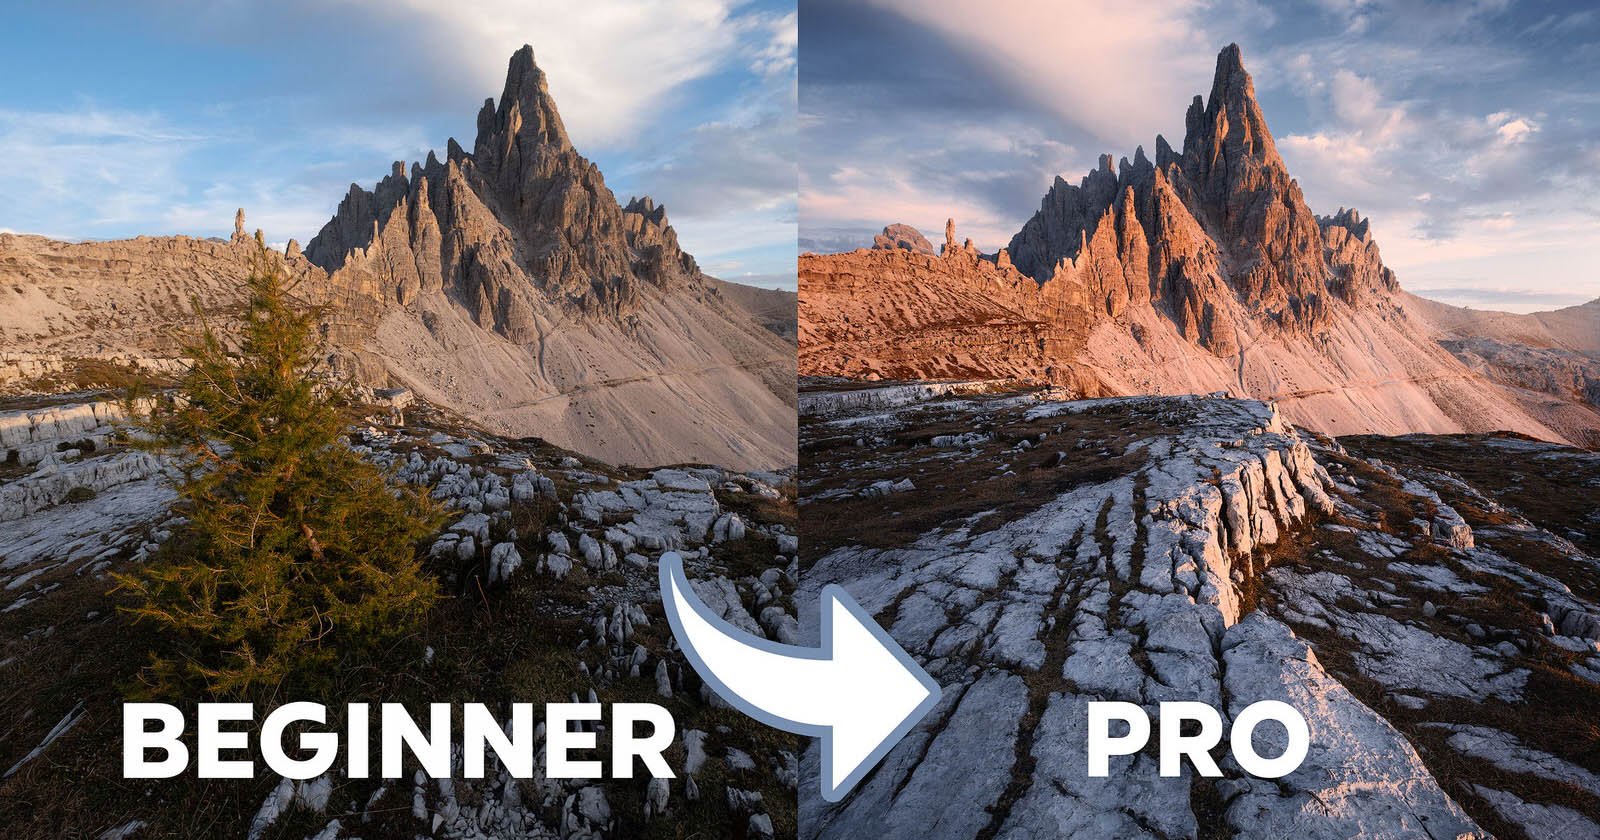 Why Your Wide-Angle Lens Images Are So Boring